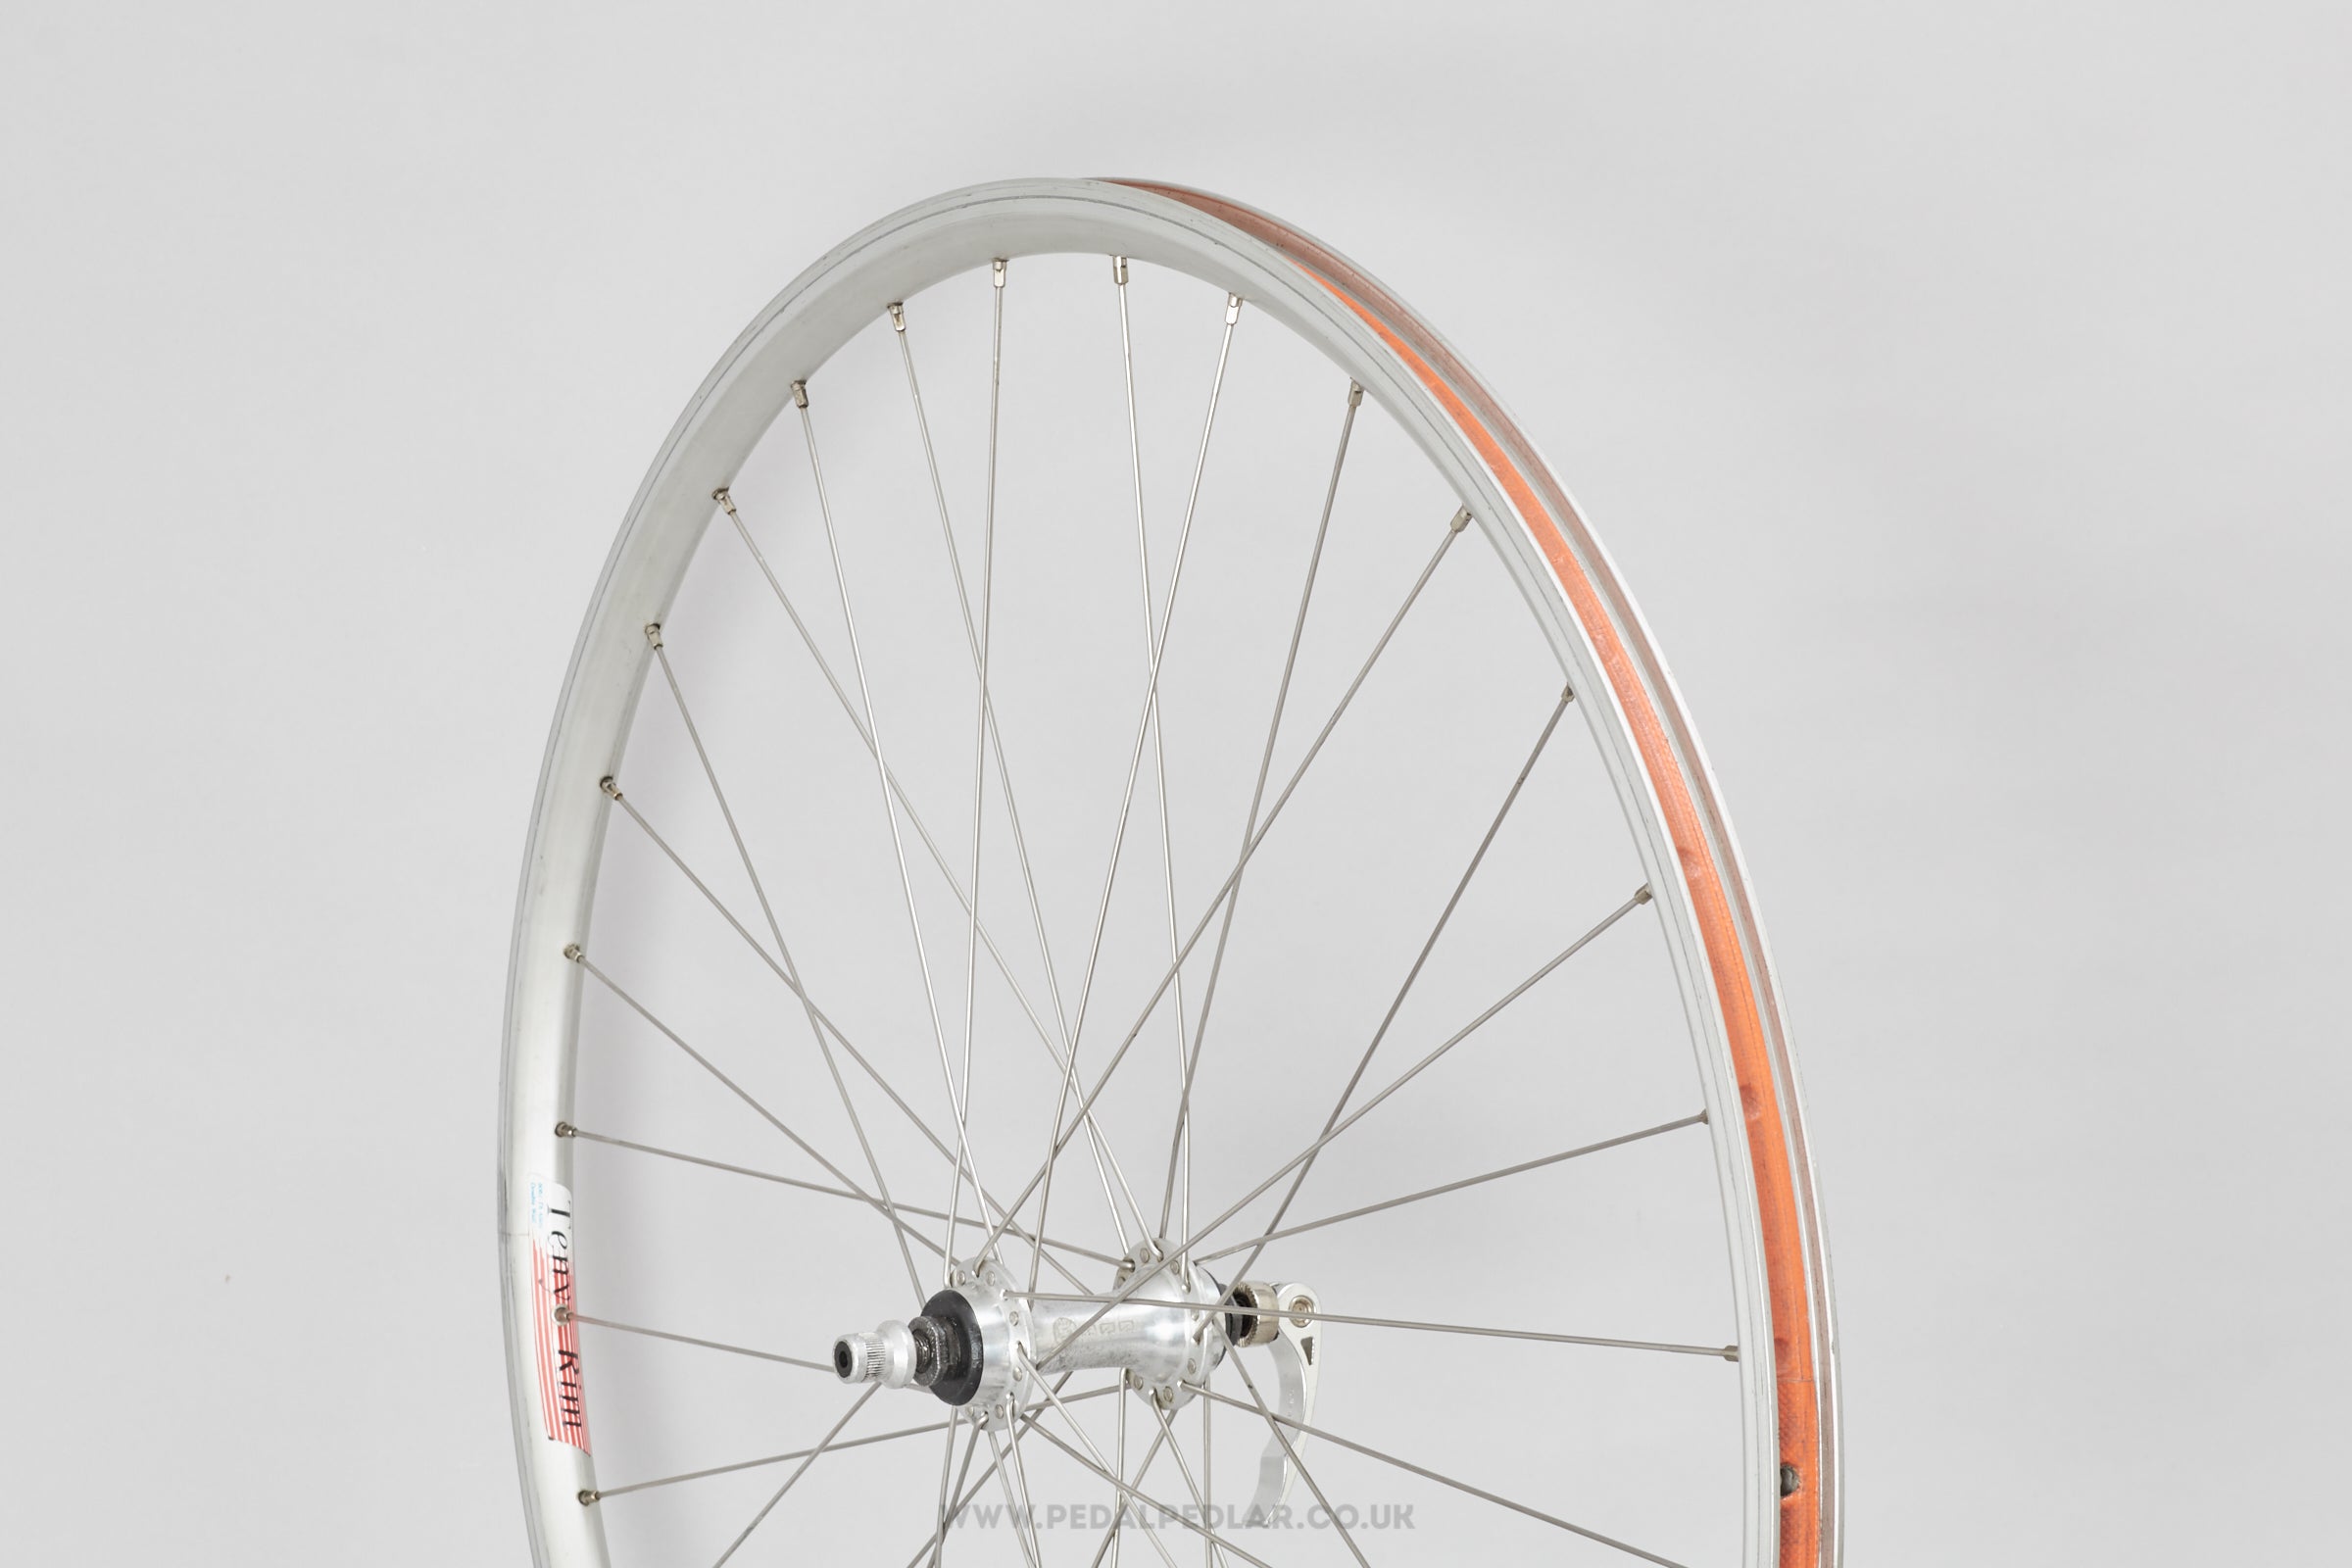 Sachs 3000 / Teny Rim Classic 700c Clincher Town/City Front Wheel - Pedal Pedlar - Bicycle Wheel For Sale